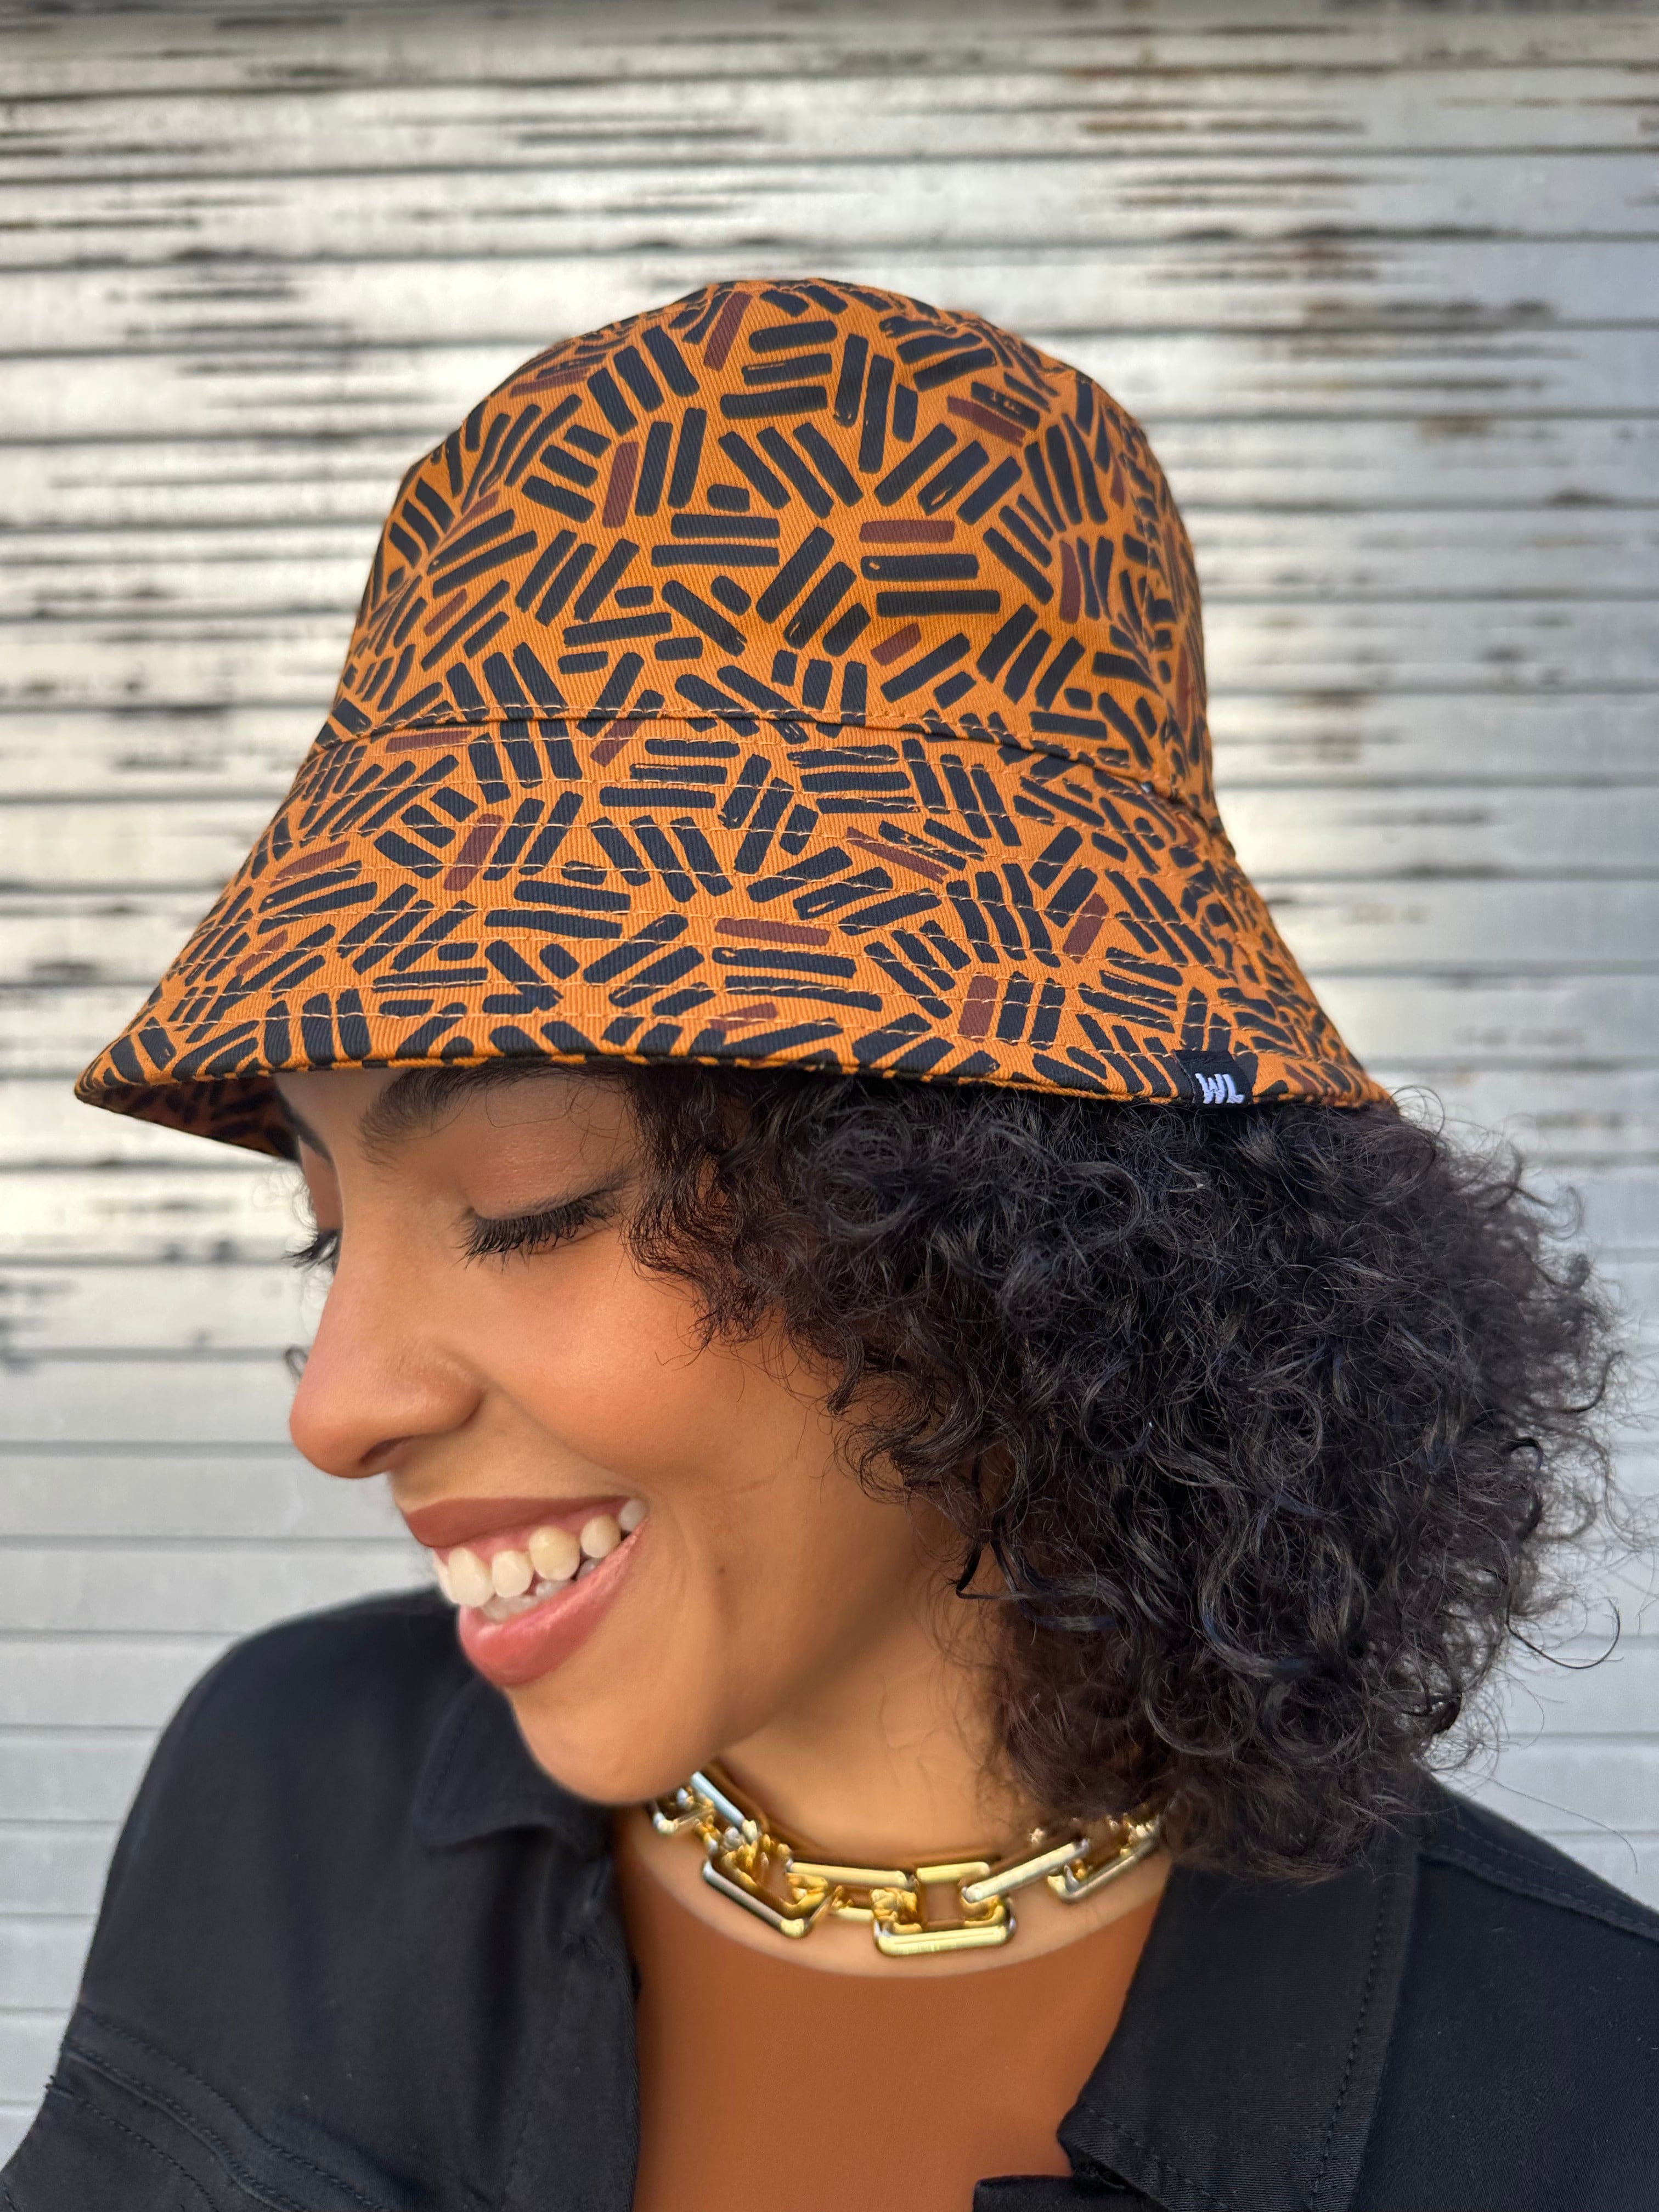 The Wrap Life Satin Lined Printed Bucket Hat in Umber Brown Hat